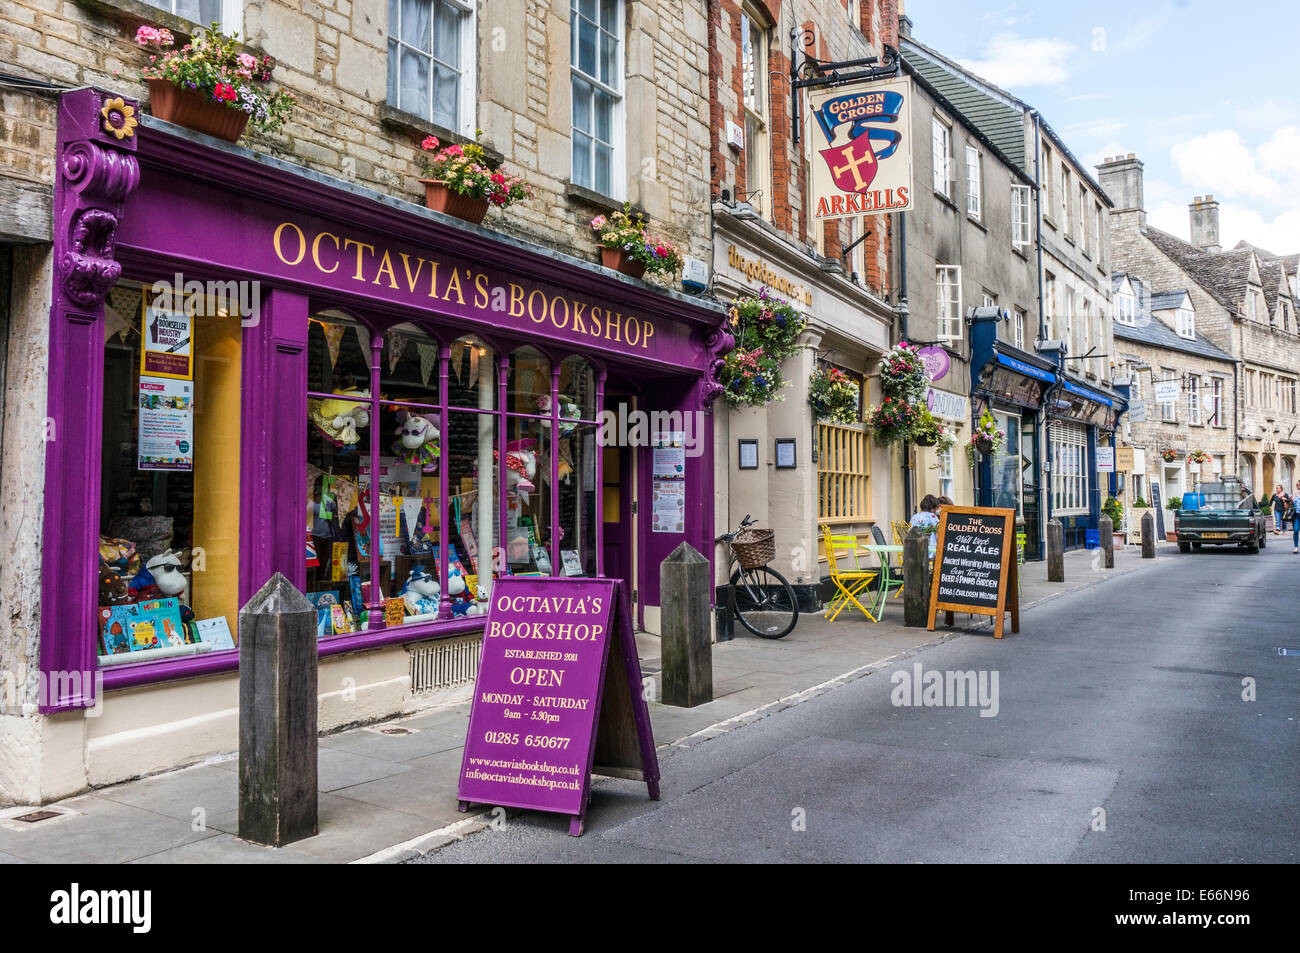 Octavia's Bookshop painted a vivid purple, alongside other shops in a side street of Cirencester town centre, Cotswolds, Gloucestershire, England, UK. Stock Photo